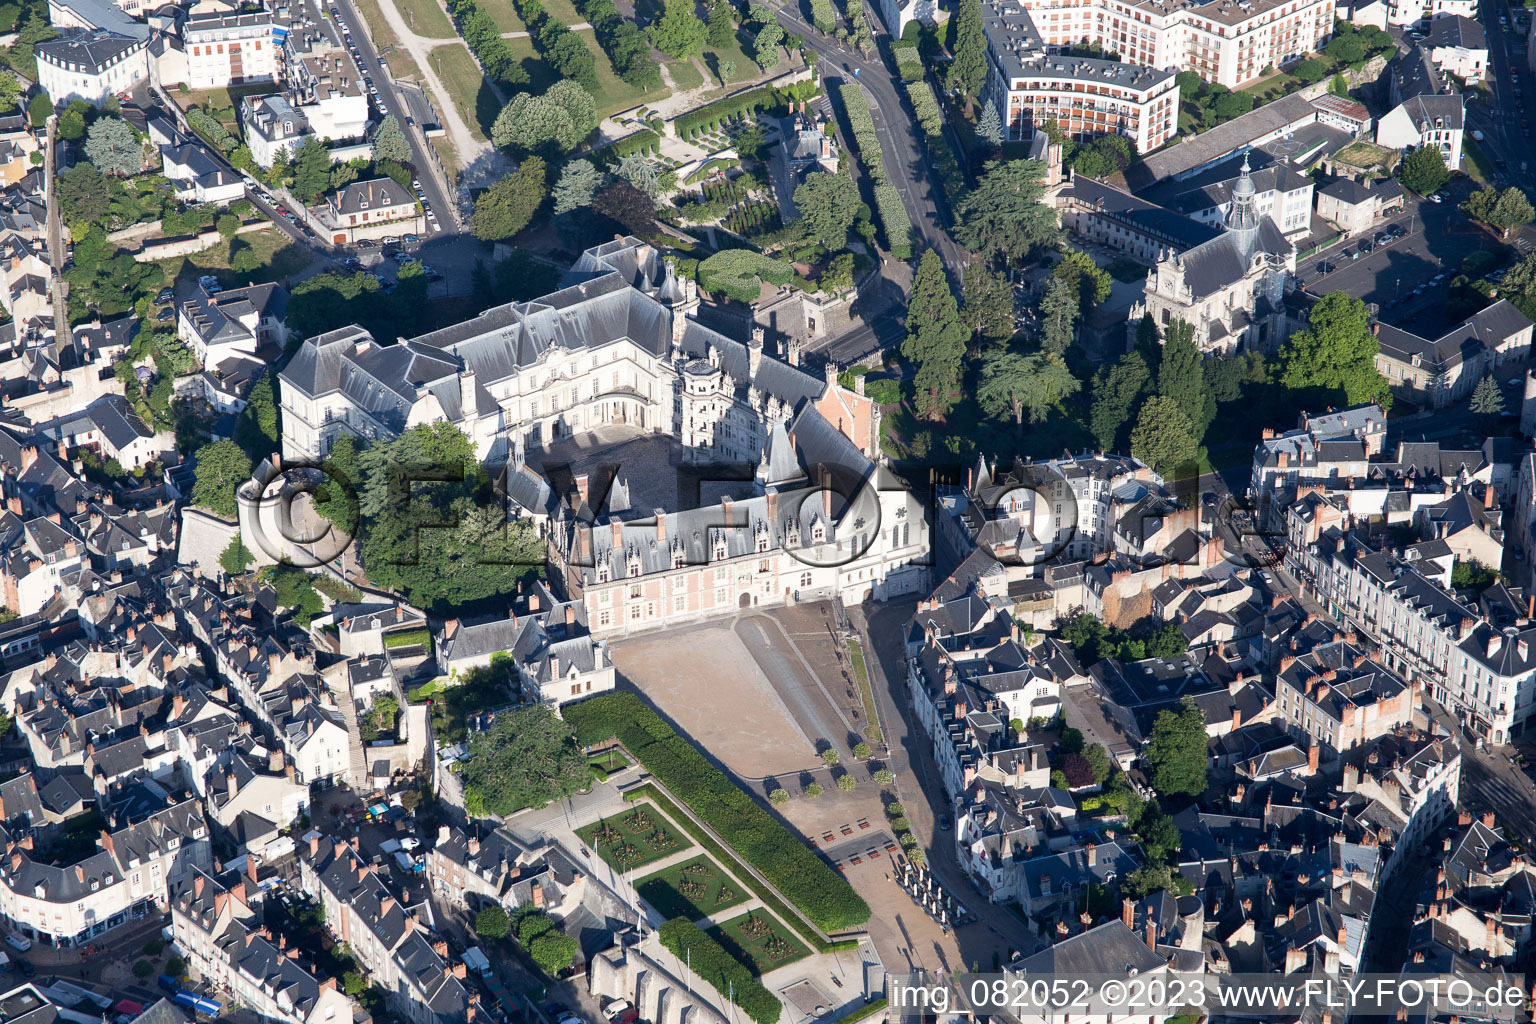 Blois in the state Loir et Cher, France seen from above